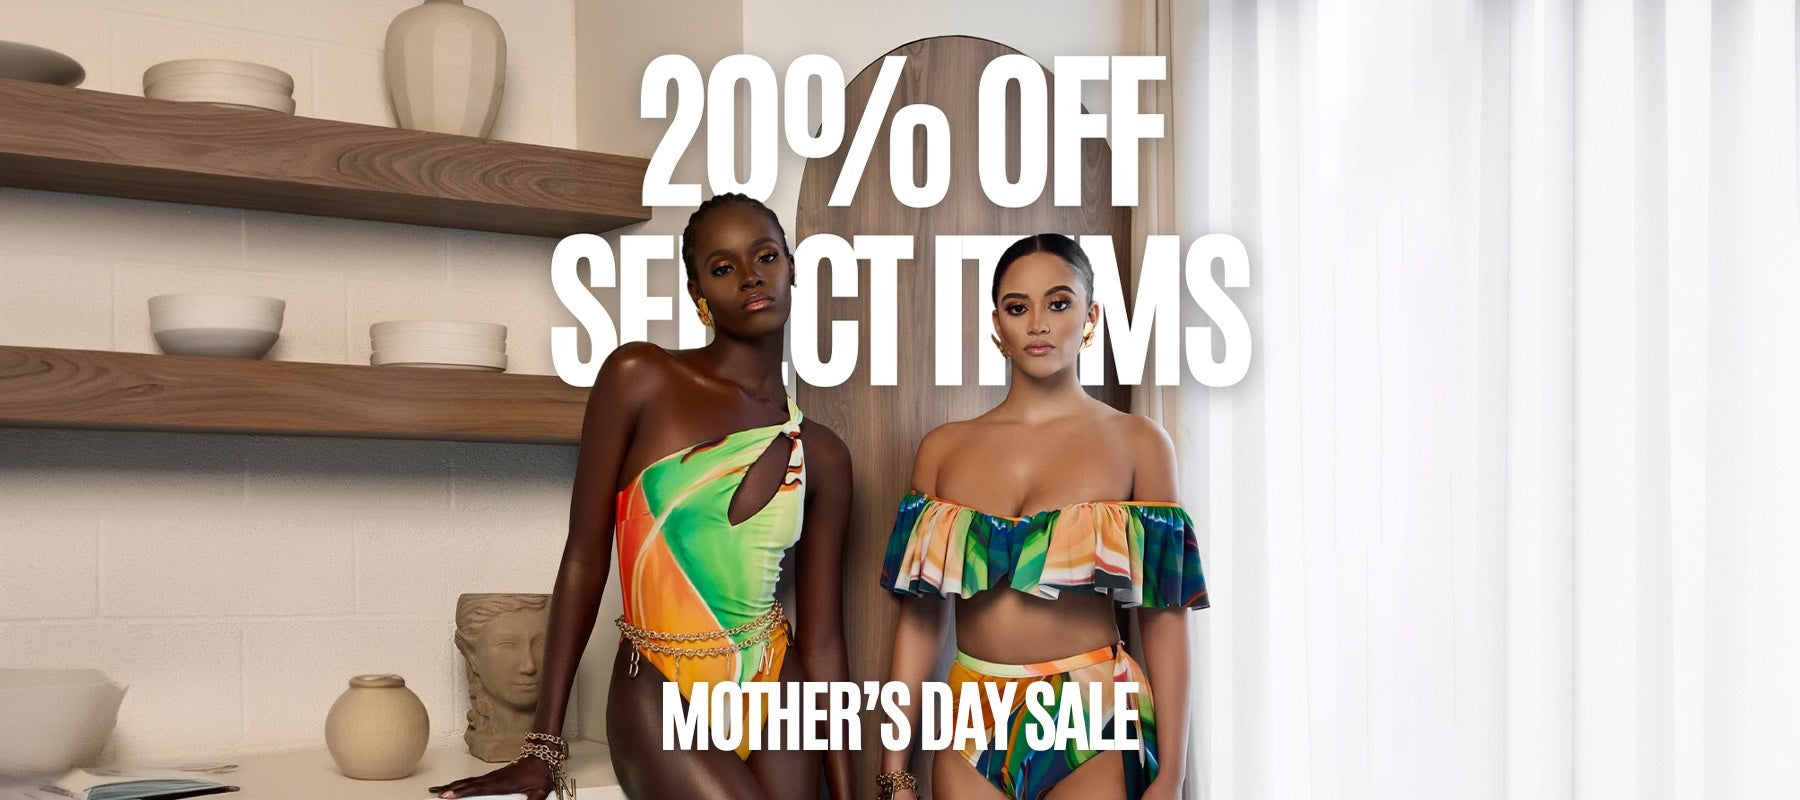 MOTHERS DAY SALE